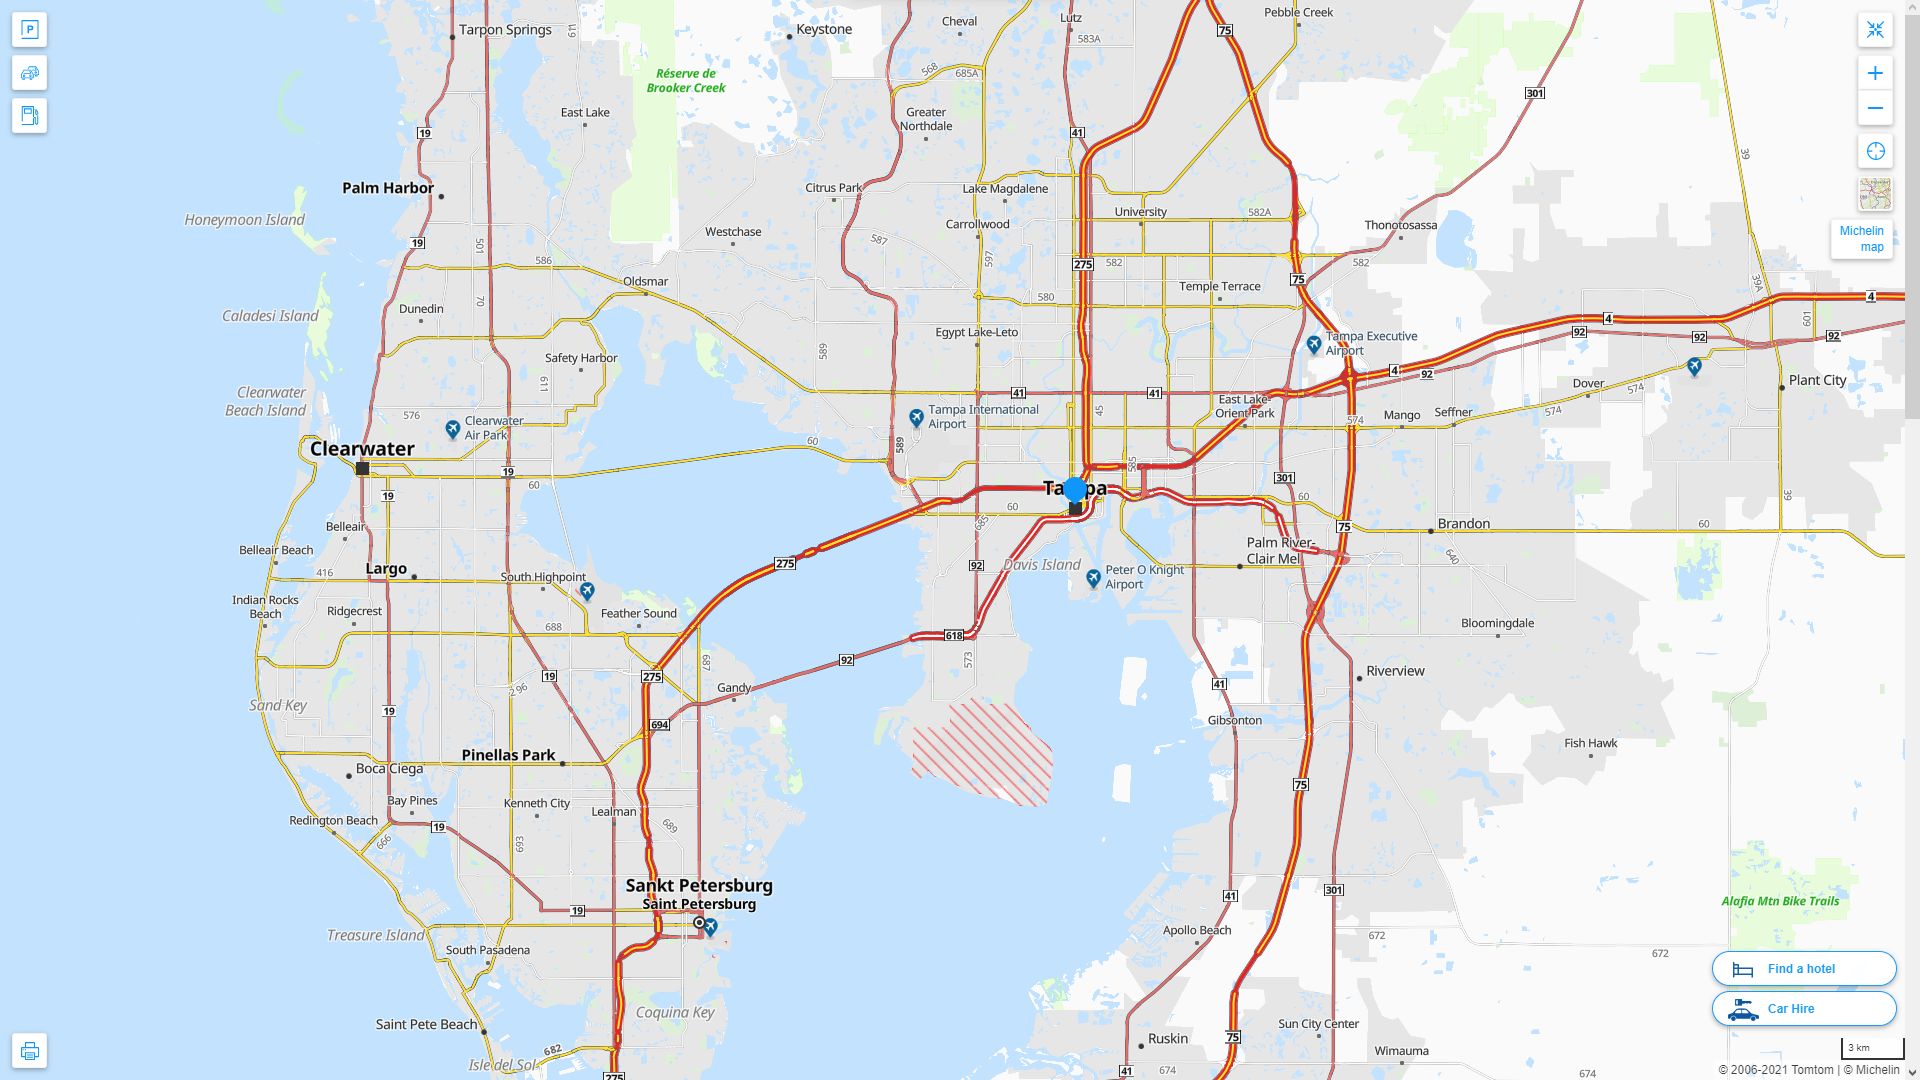 Tampa Florida Highway and Road Map